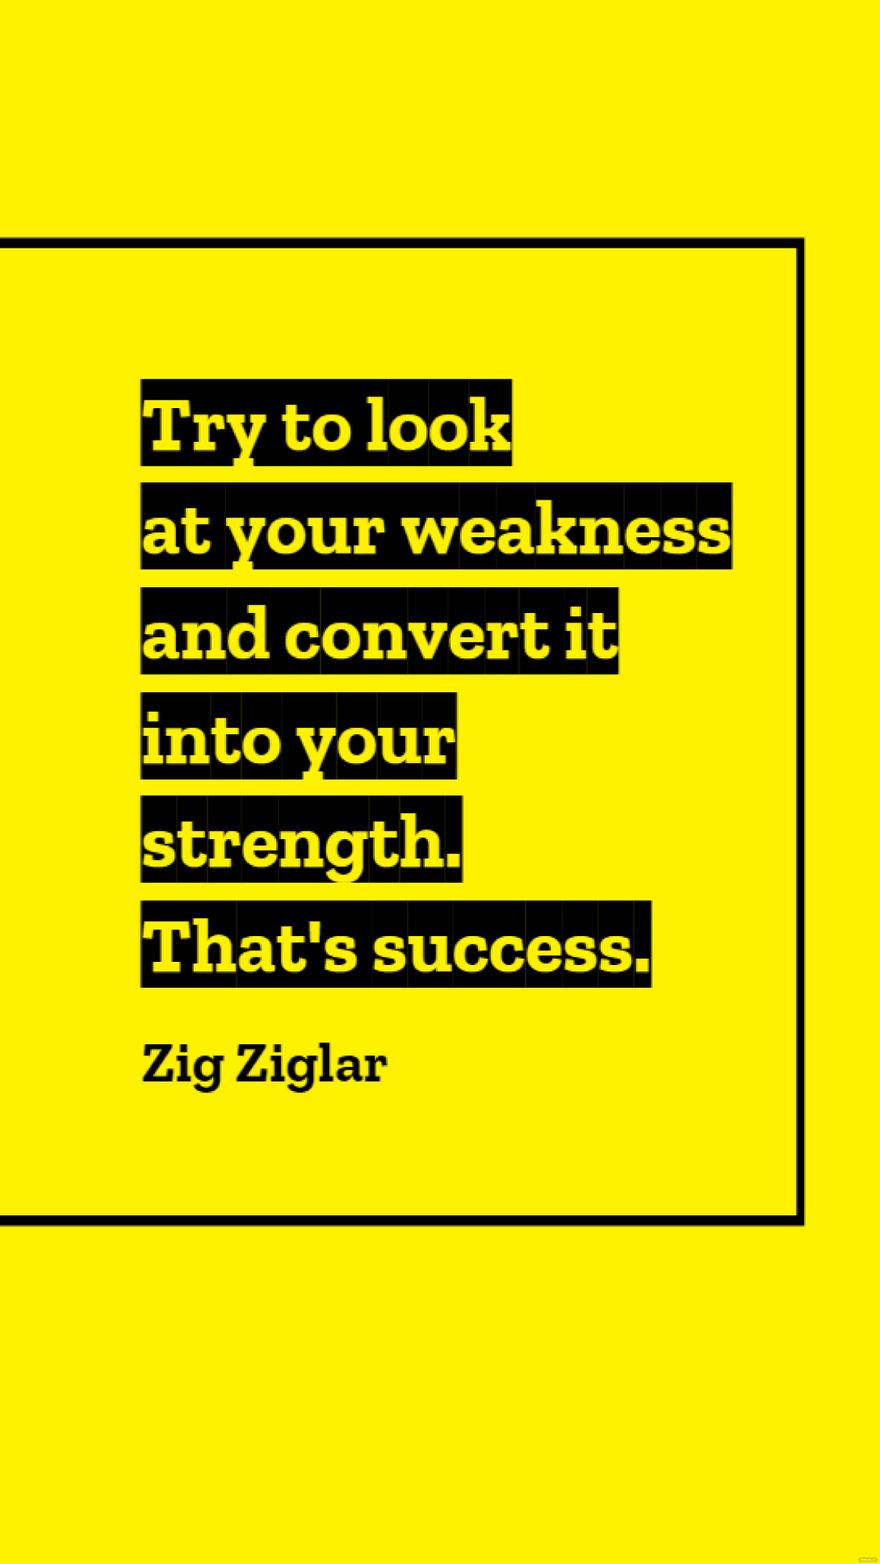 Zig Ziglar - Try to look at your weakness and convert it into your strength. That's success.